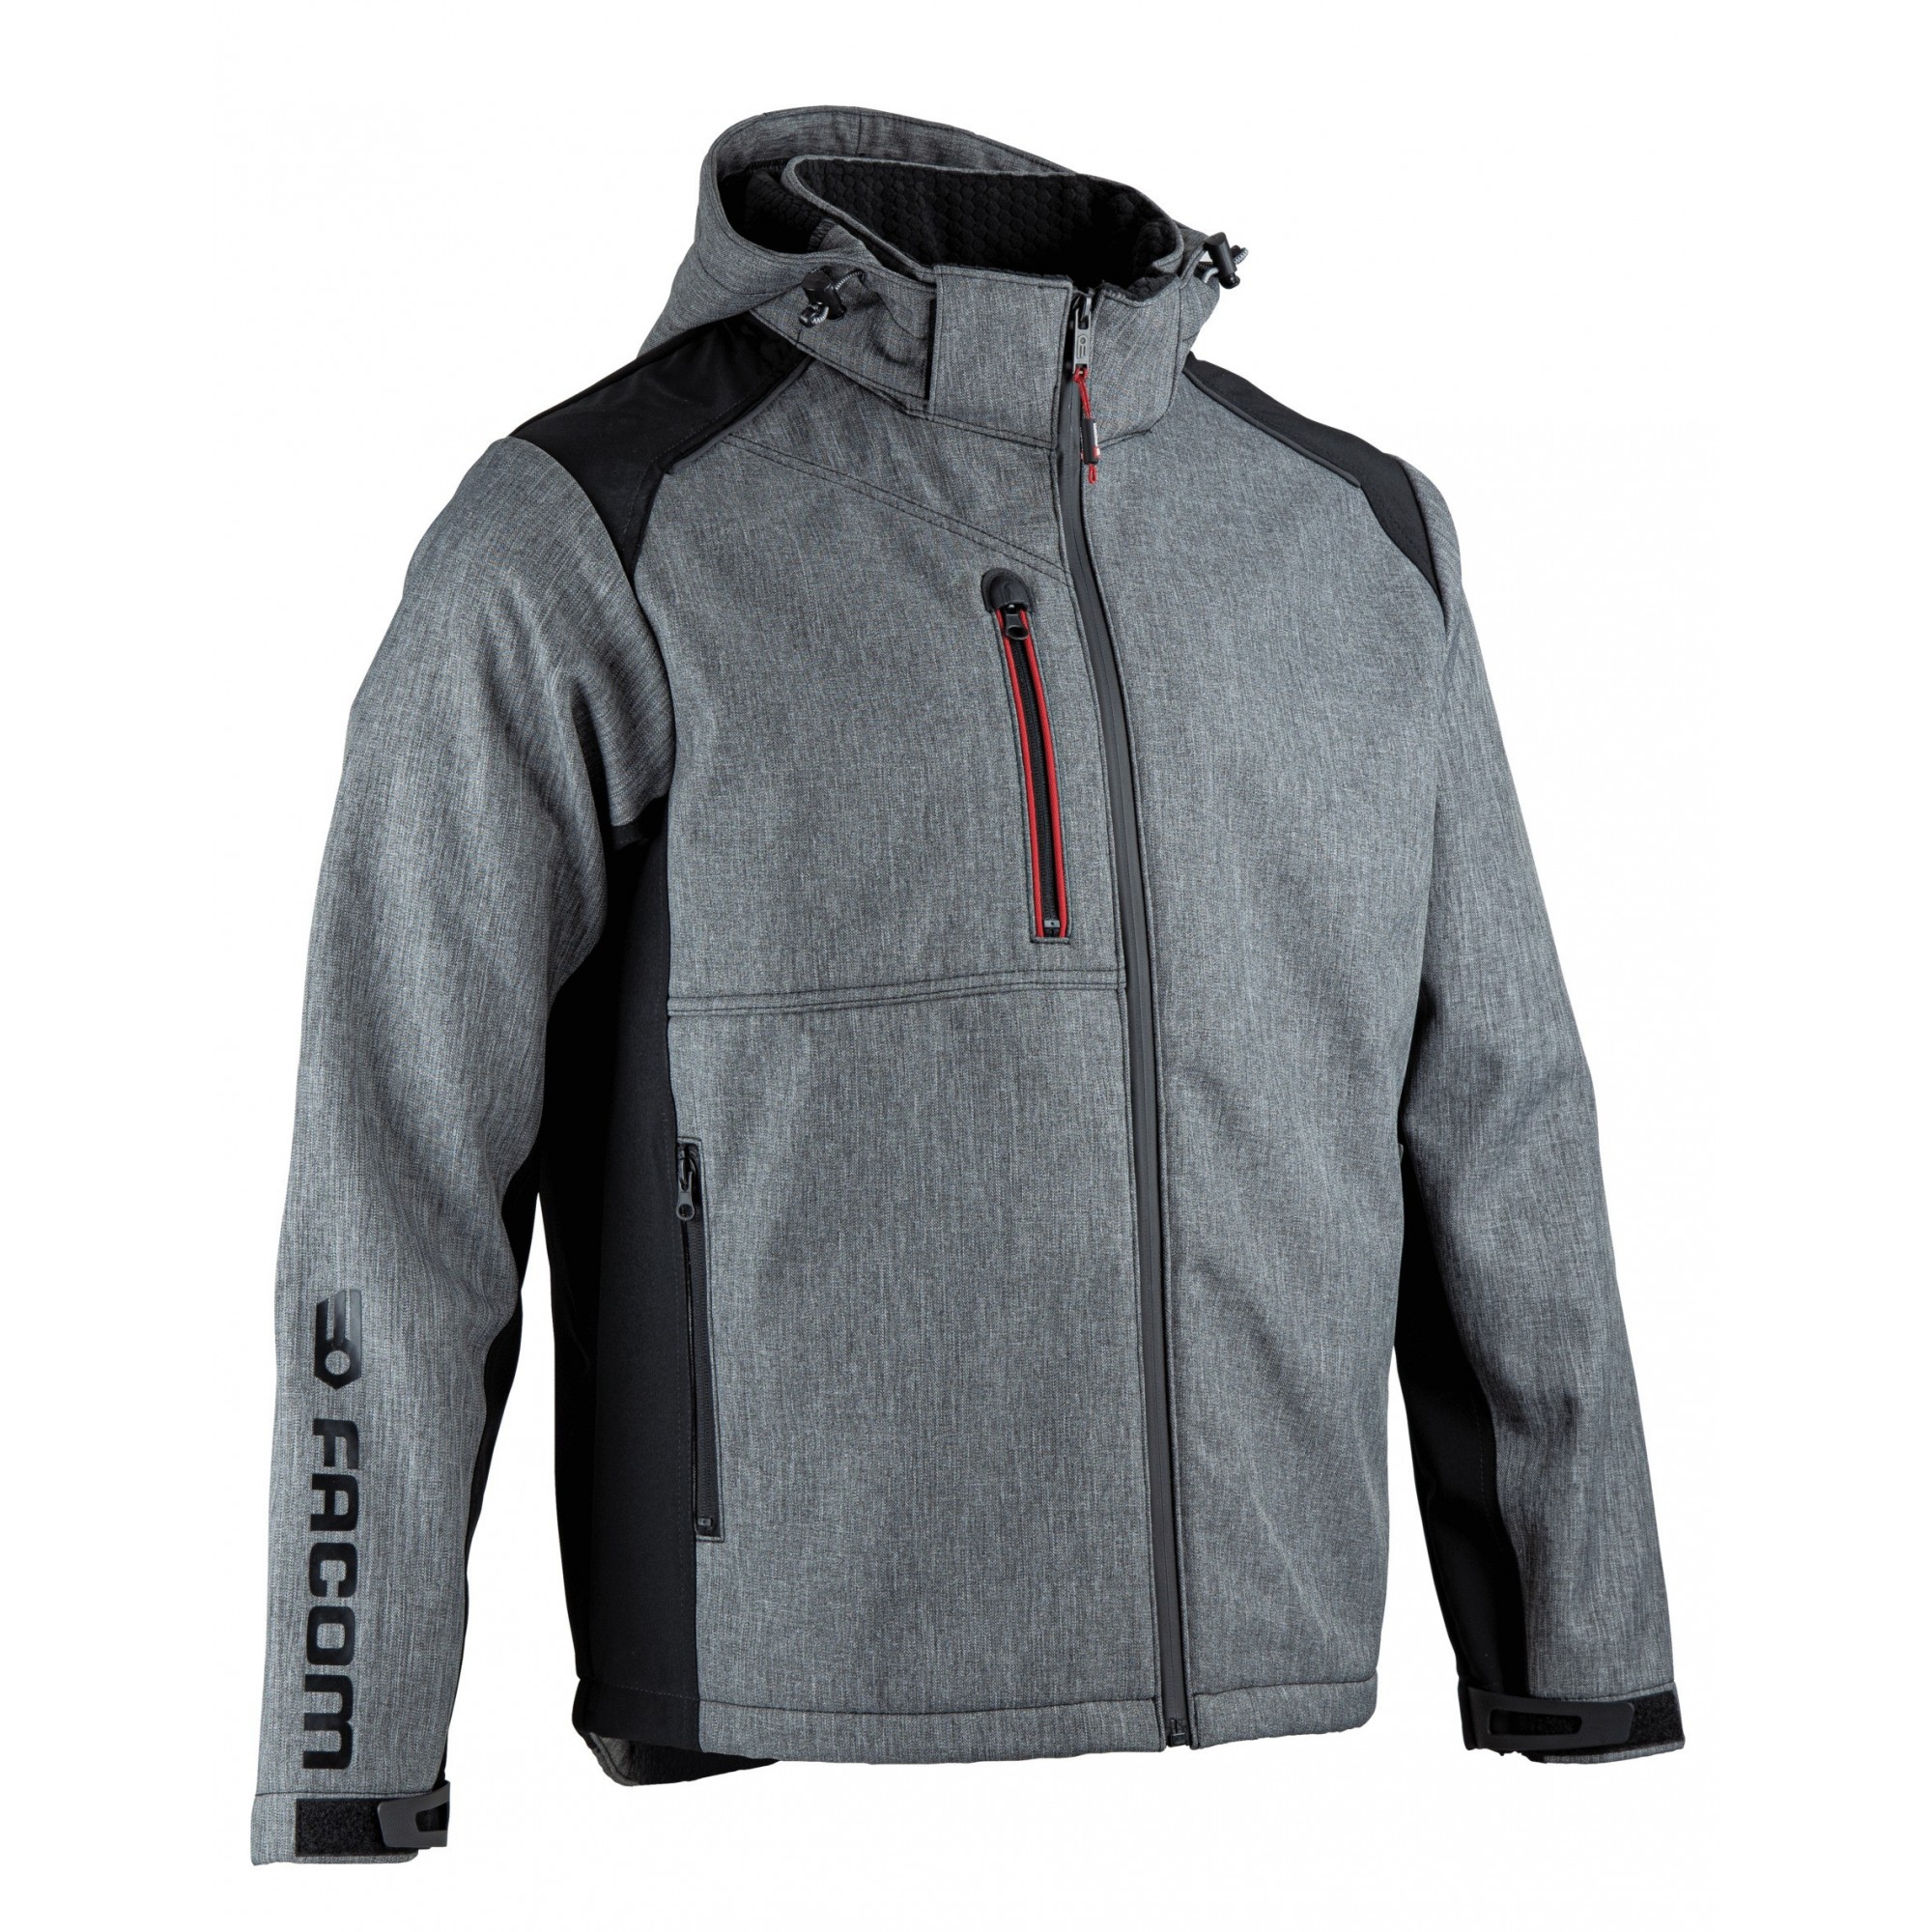 Veste Softshell 3 couches Trial - Facom